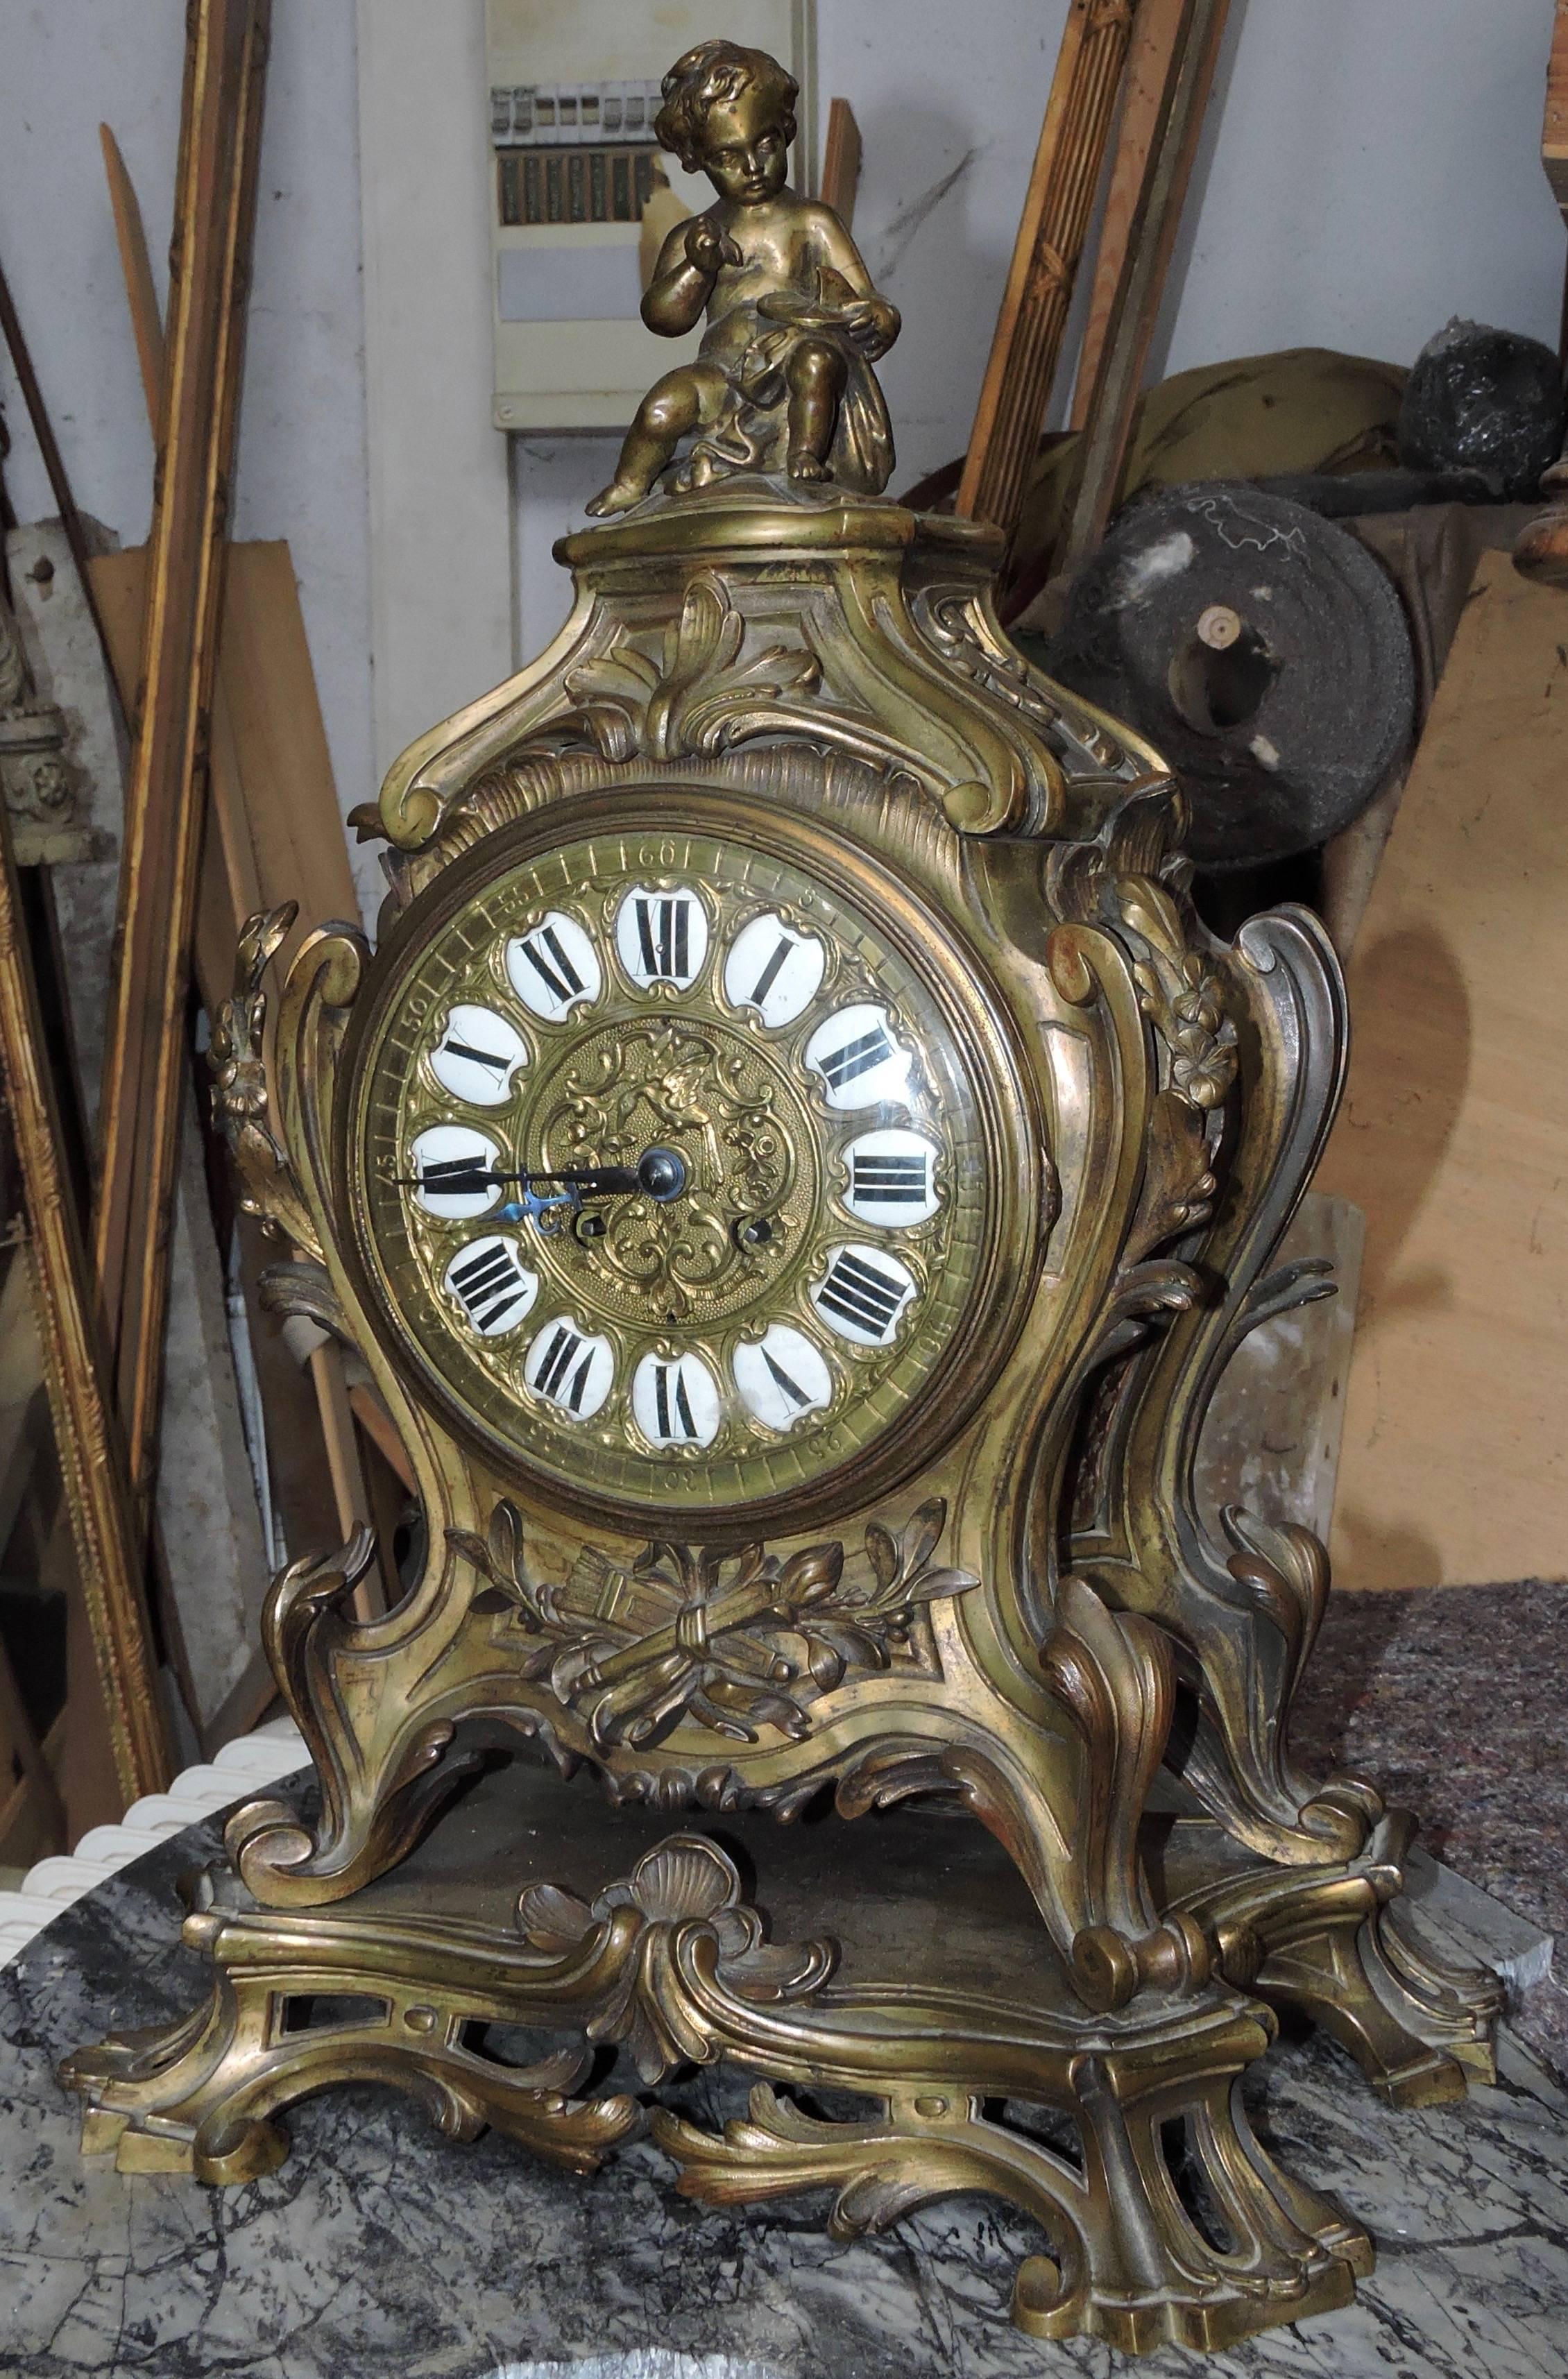 A 19th century ormolu Louis XV large clock, circa 1880
Surmounted by a Putti, on a Rocaille base.
The mouvement by Ch.Gautier Fils & B.Graulot Paris Bordeaux
Numbered and with its original key and pendulum.
 